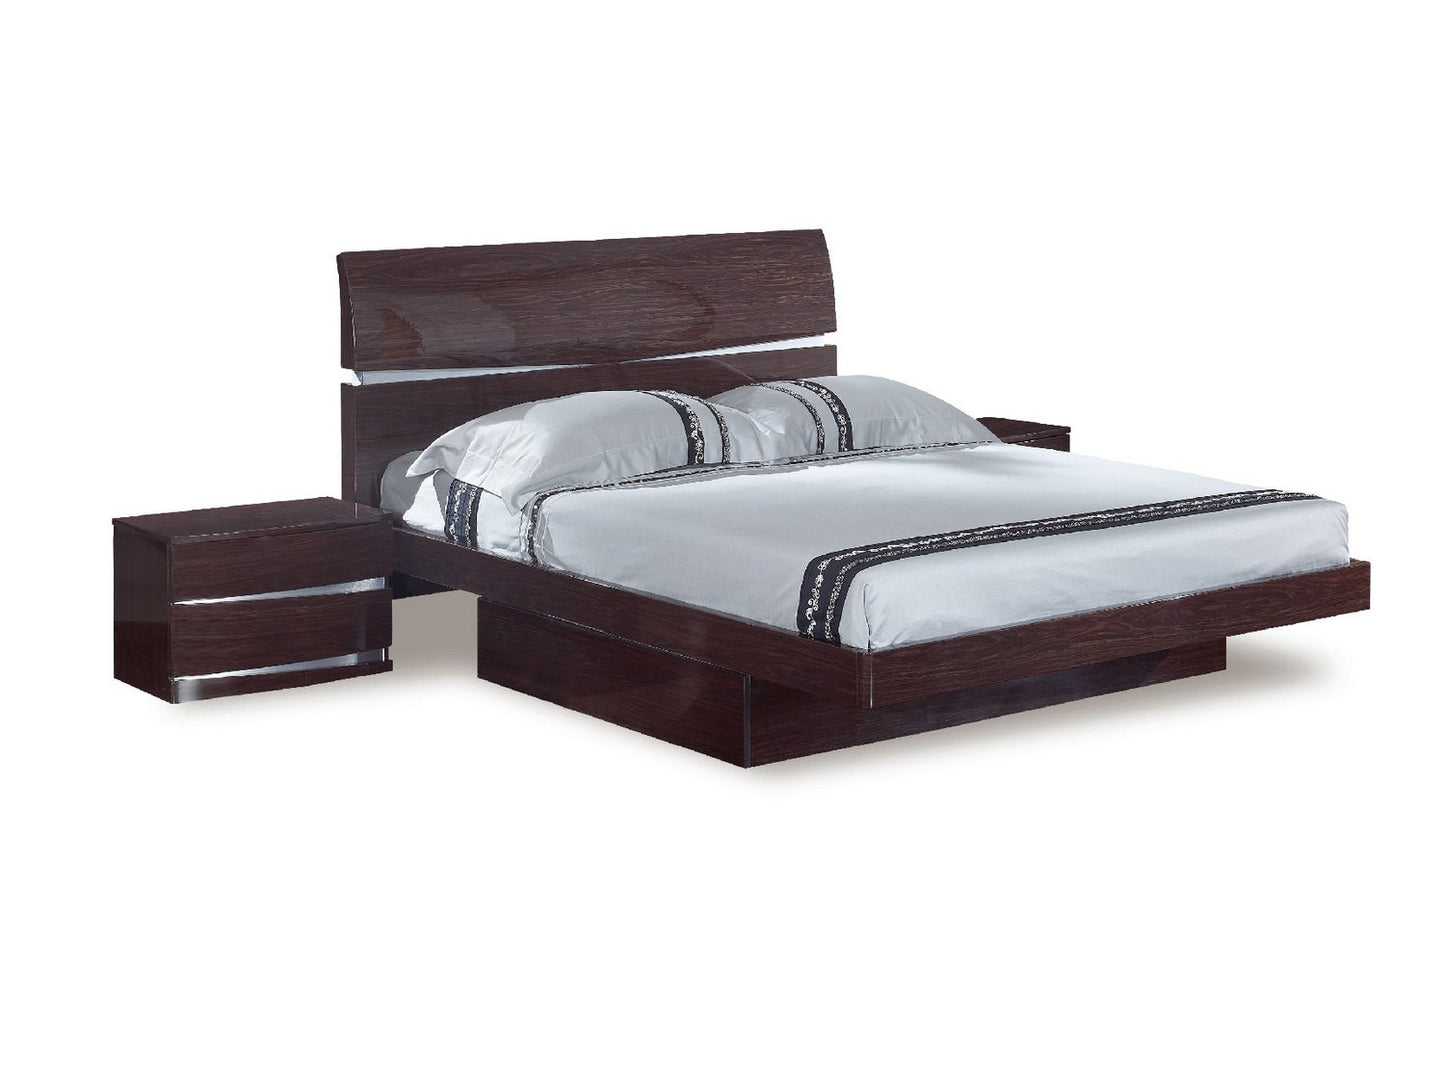 Global United Wynn 4 Pc Bedroom Collection (2 Finishes)